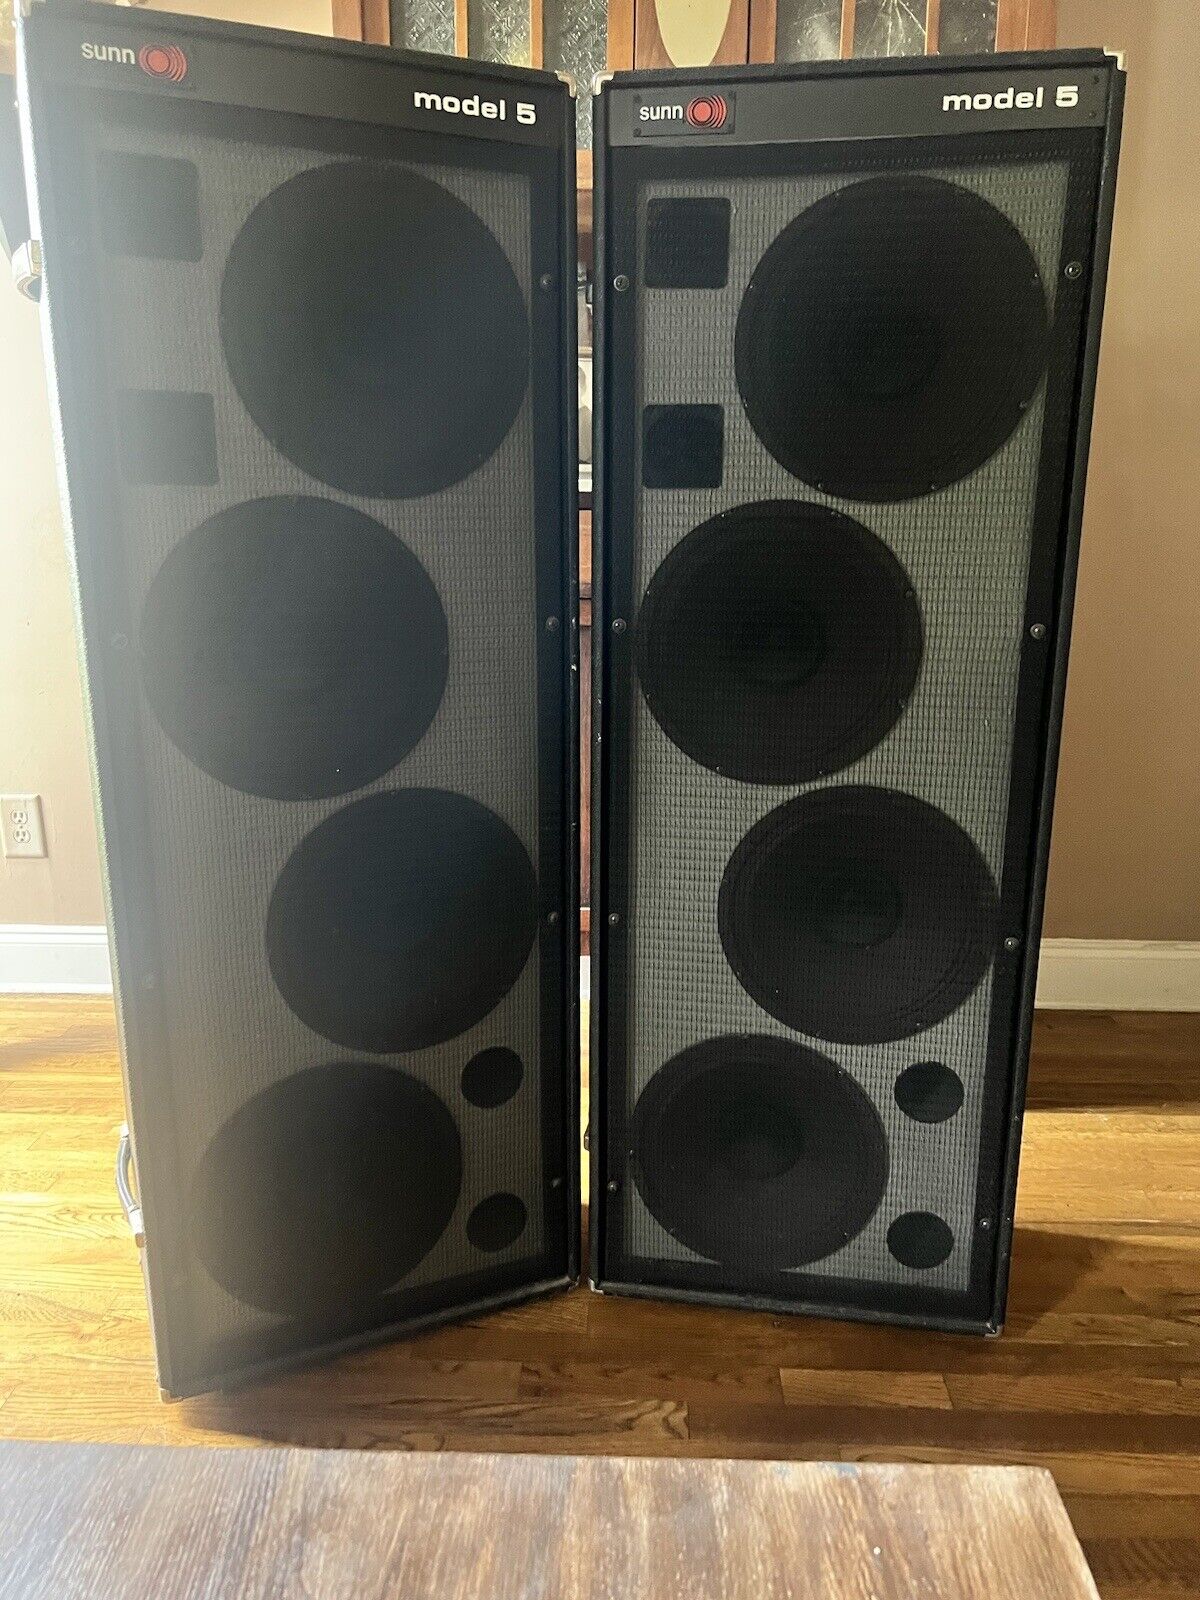 SUNN Model 5 PA SPEAKER TOWER Cabinets RARE 4x12 Pair Mint 1970s LOCAL PICKUP